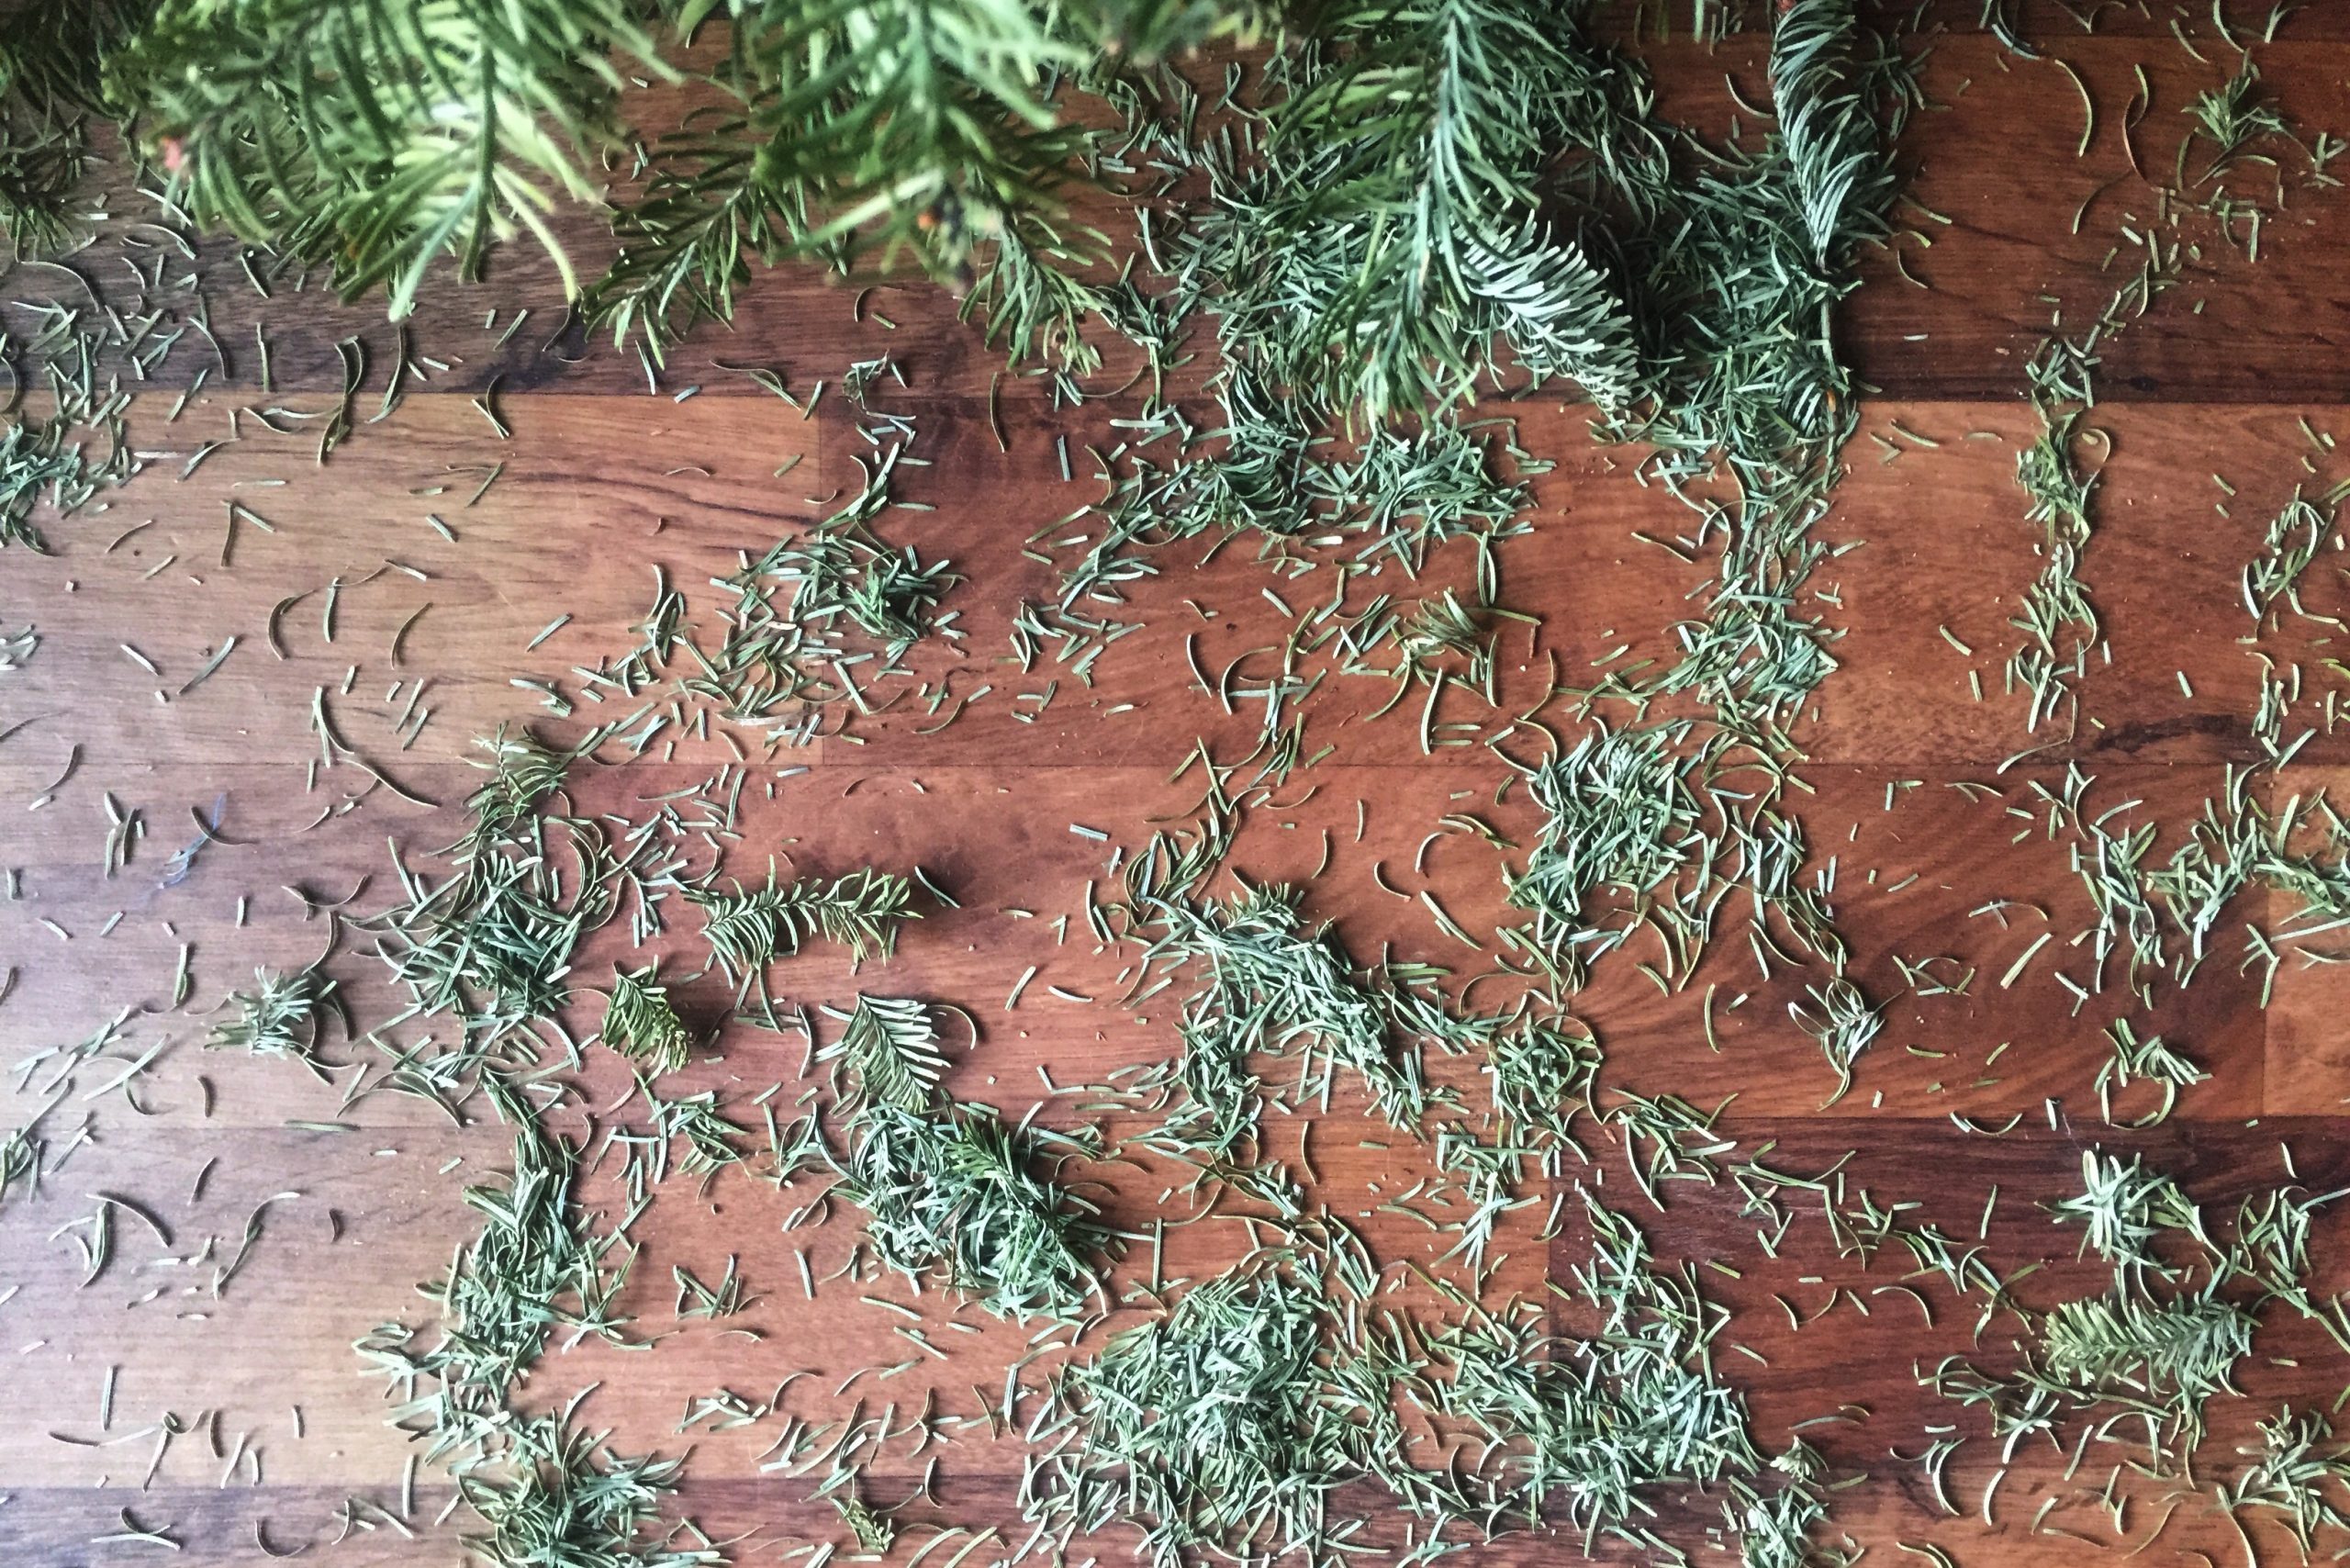 Tree Services: Cleaning Up Pine Needles